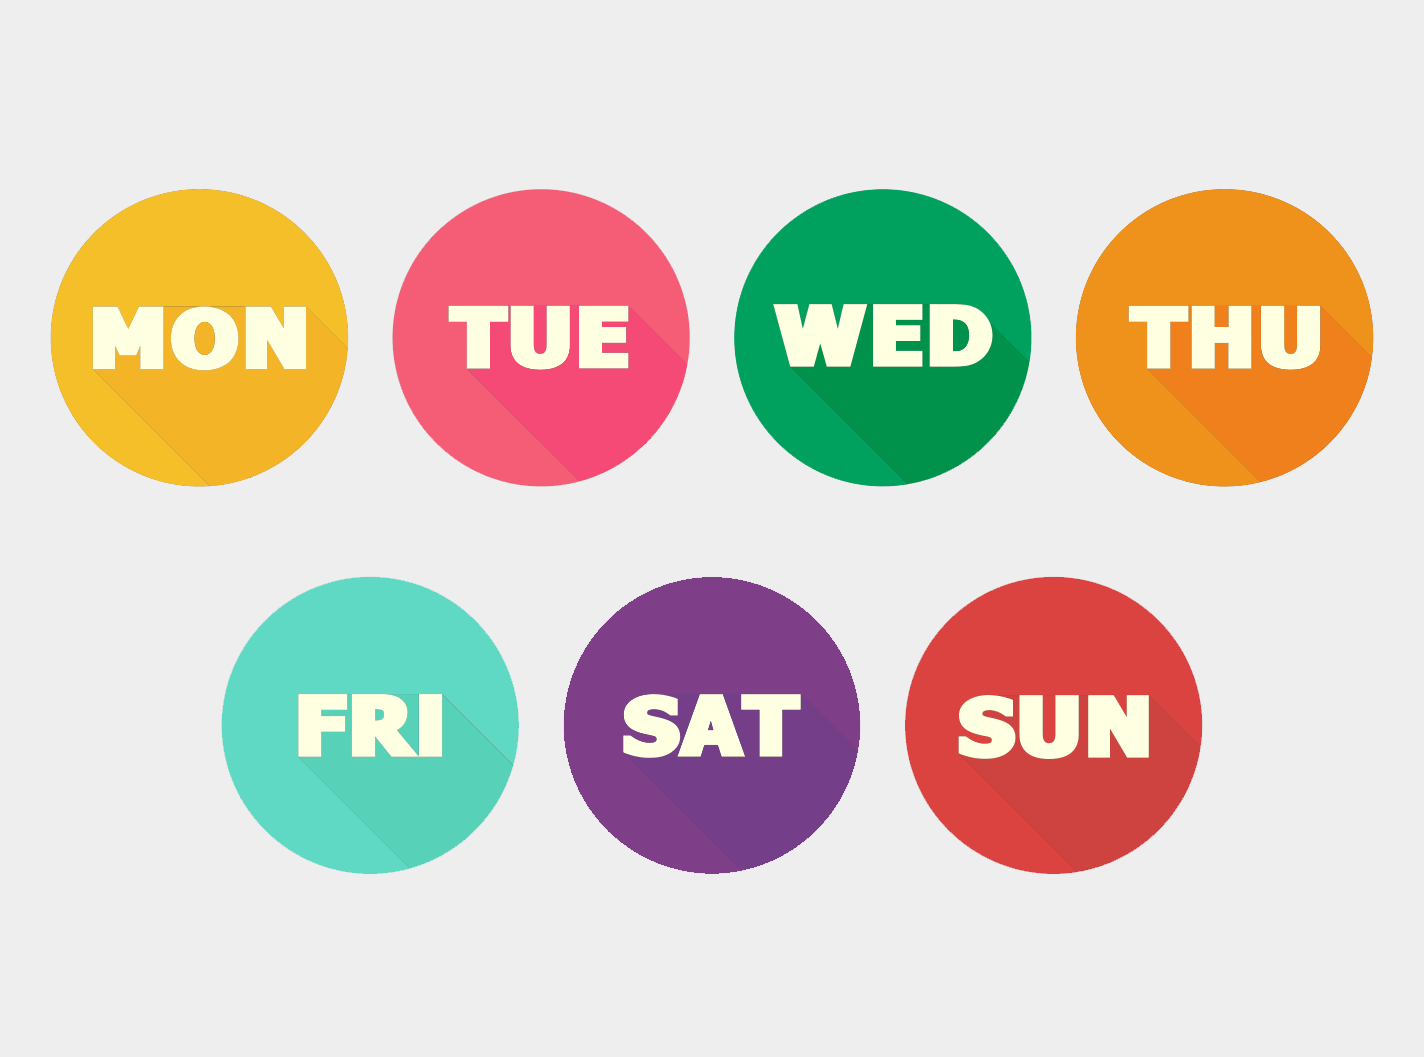 Days of the Week in Hindi